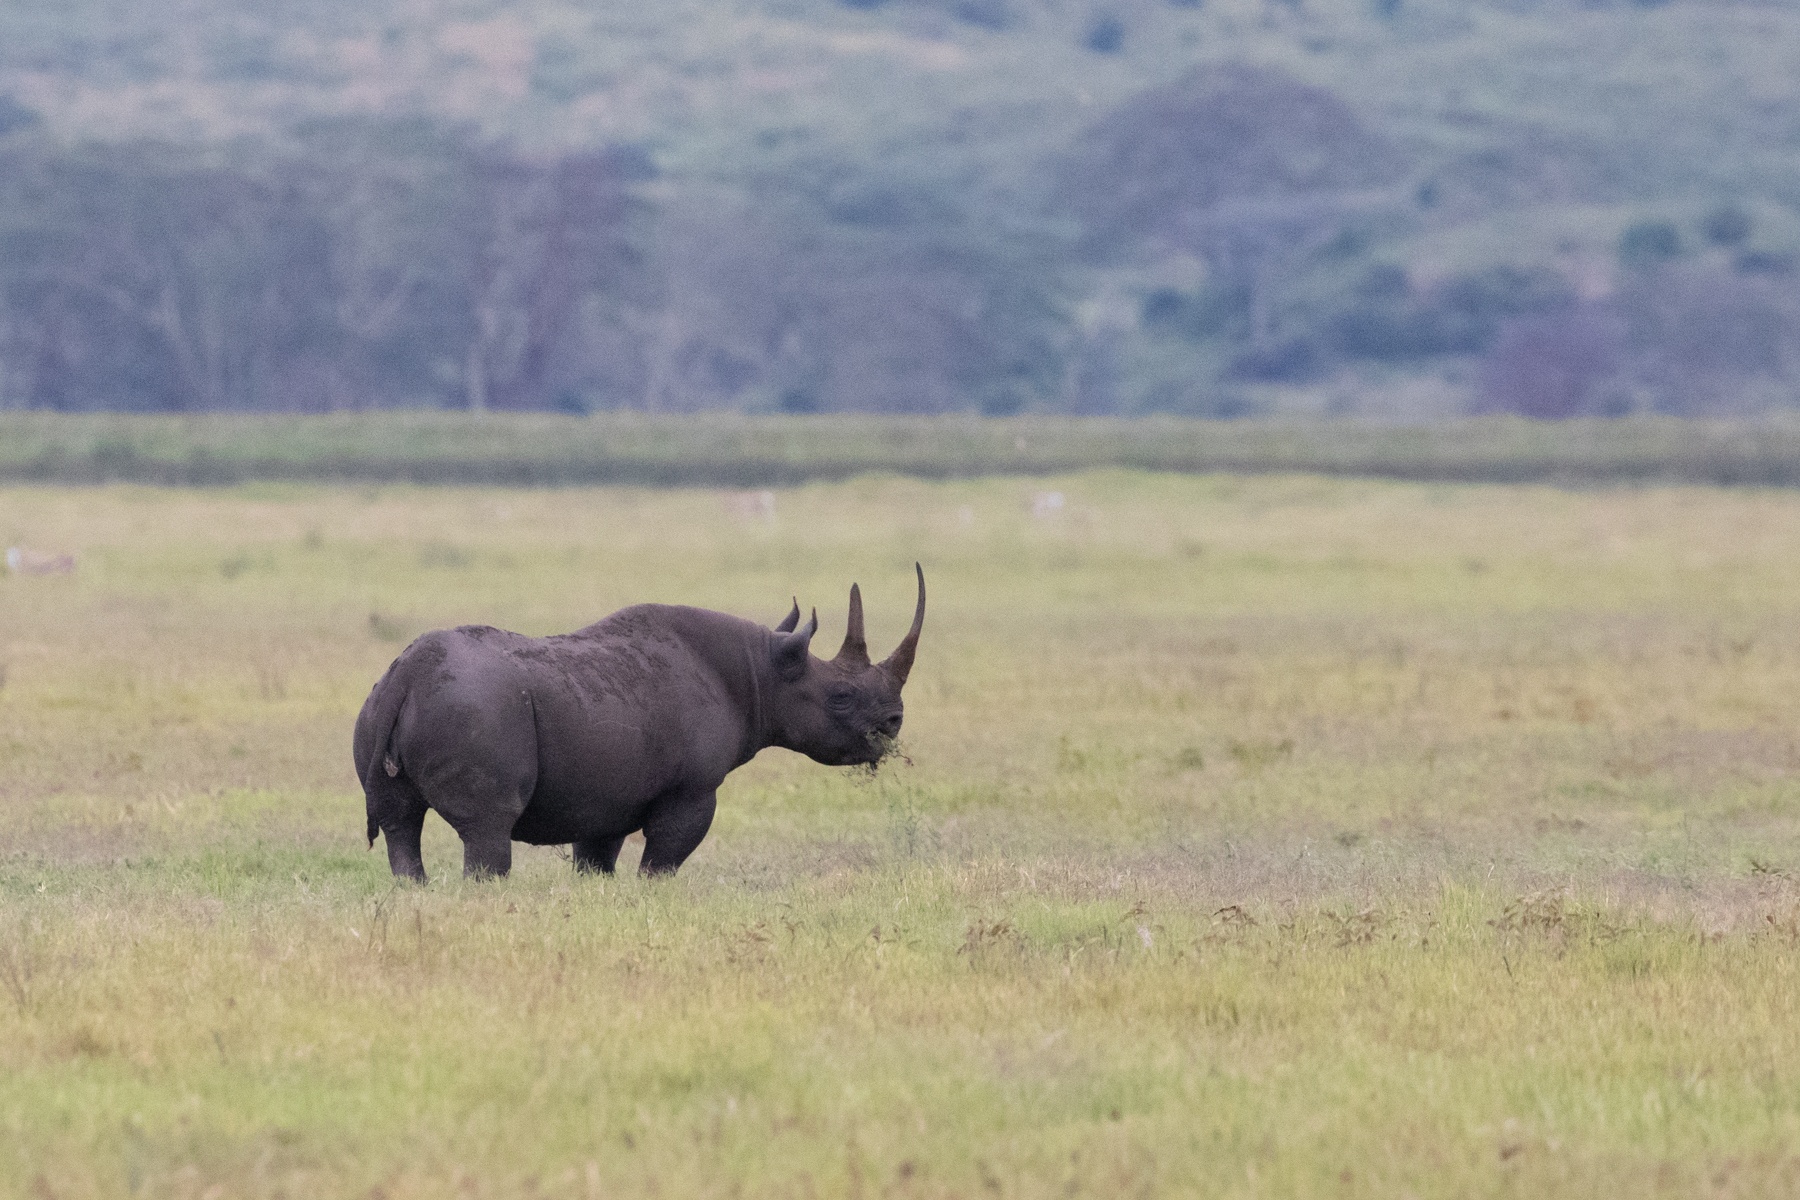 A distant black rhino in Ngorongoro, the first of two black rhinos we saw on our tour